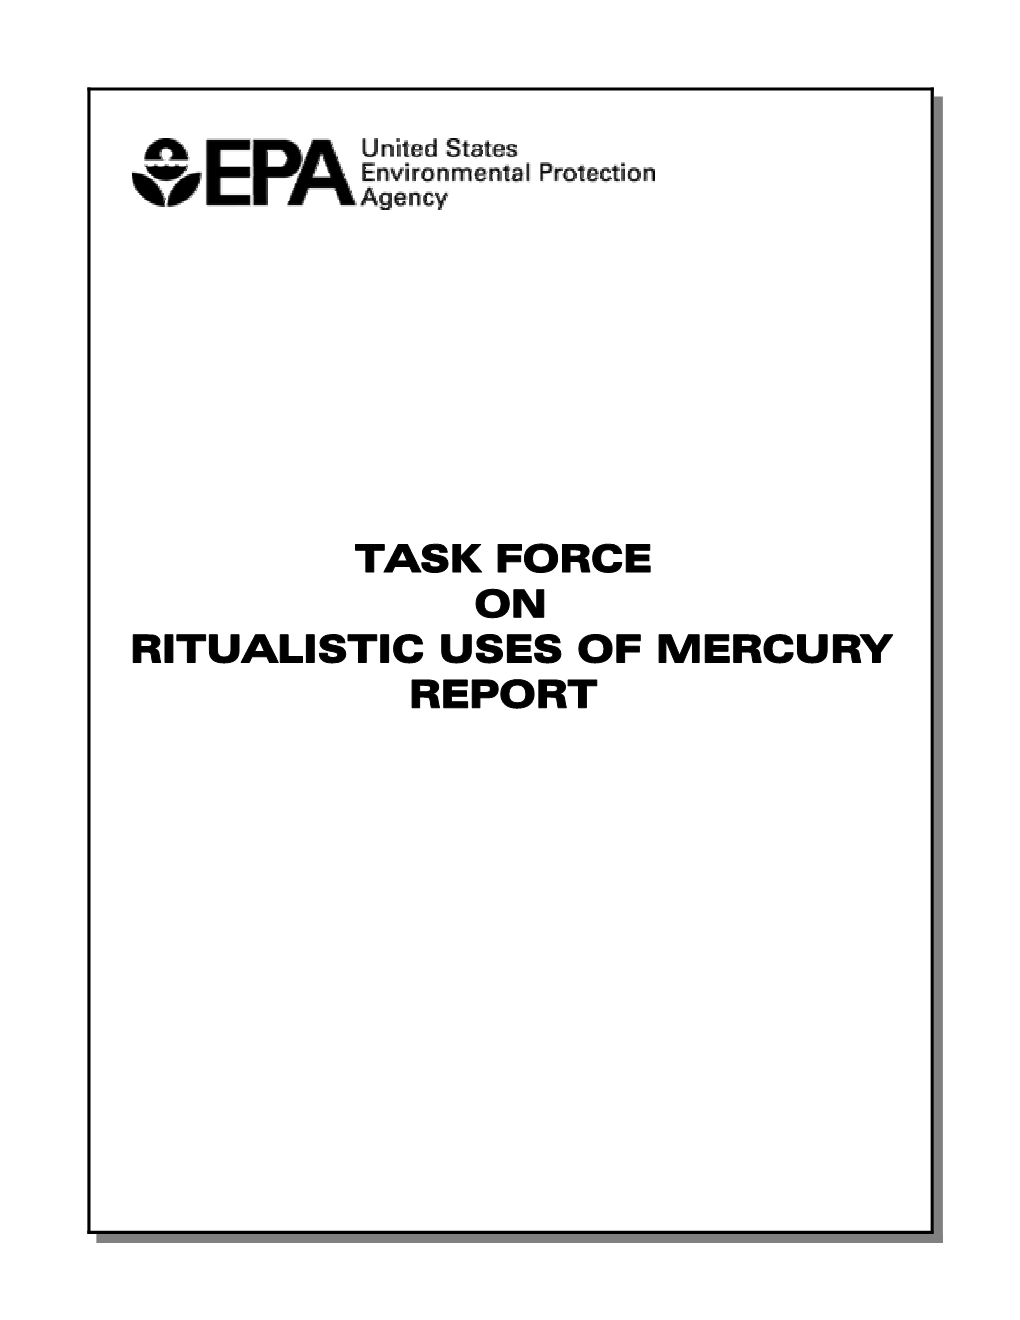 Task Force on Ritualistic Uses Of